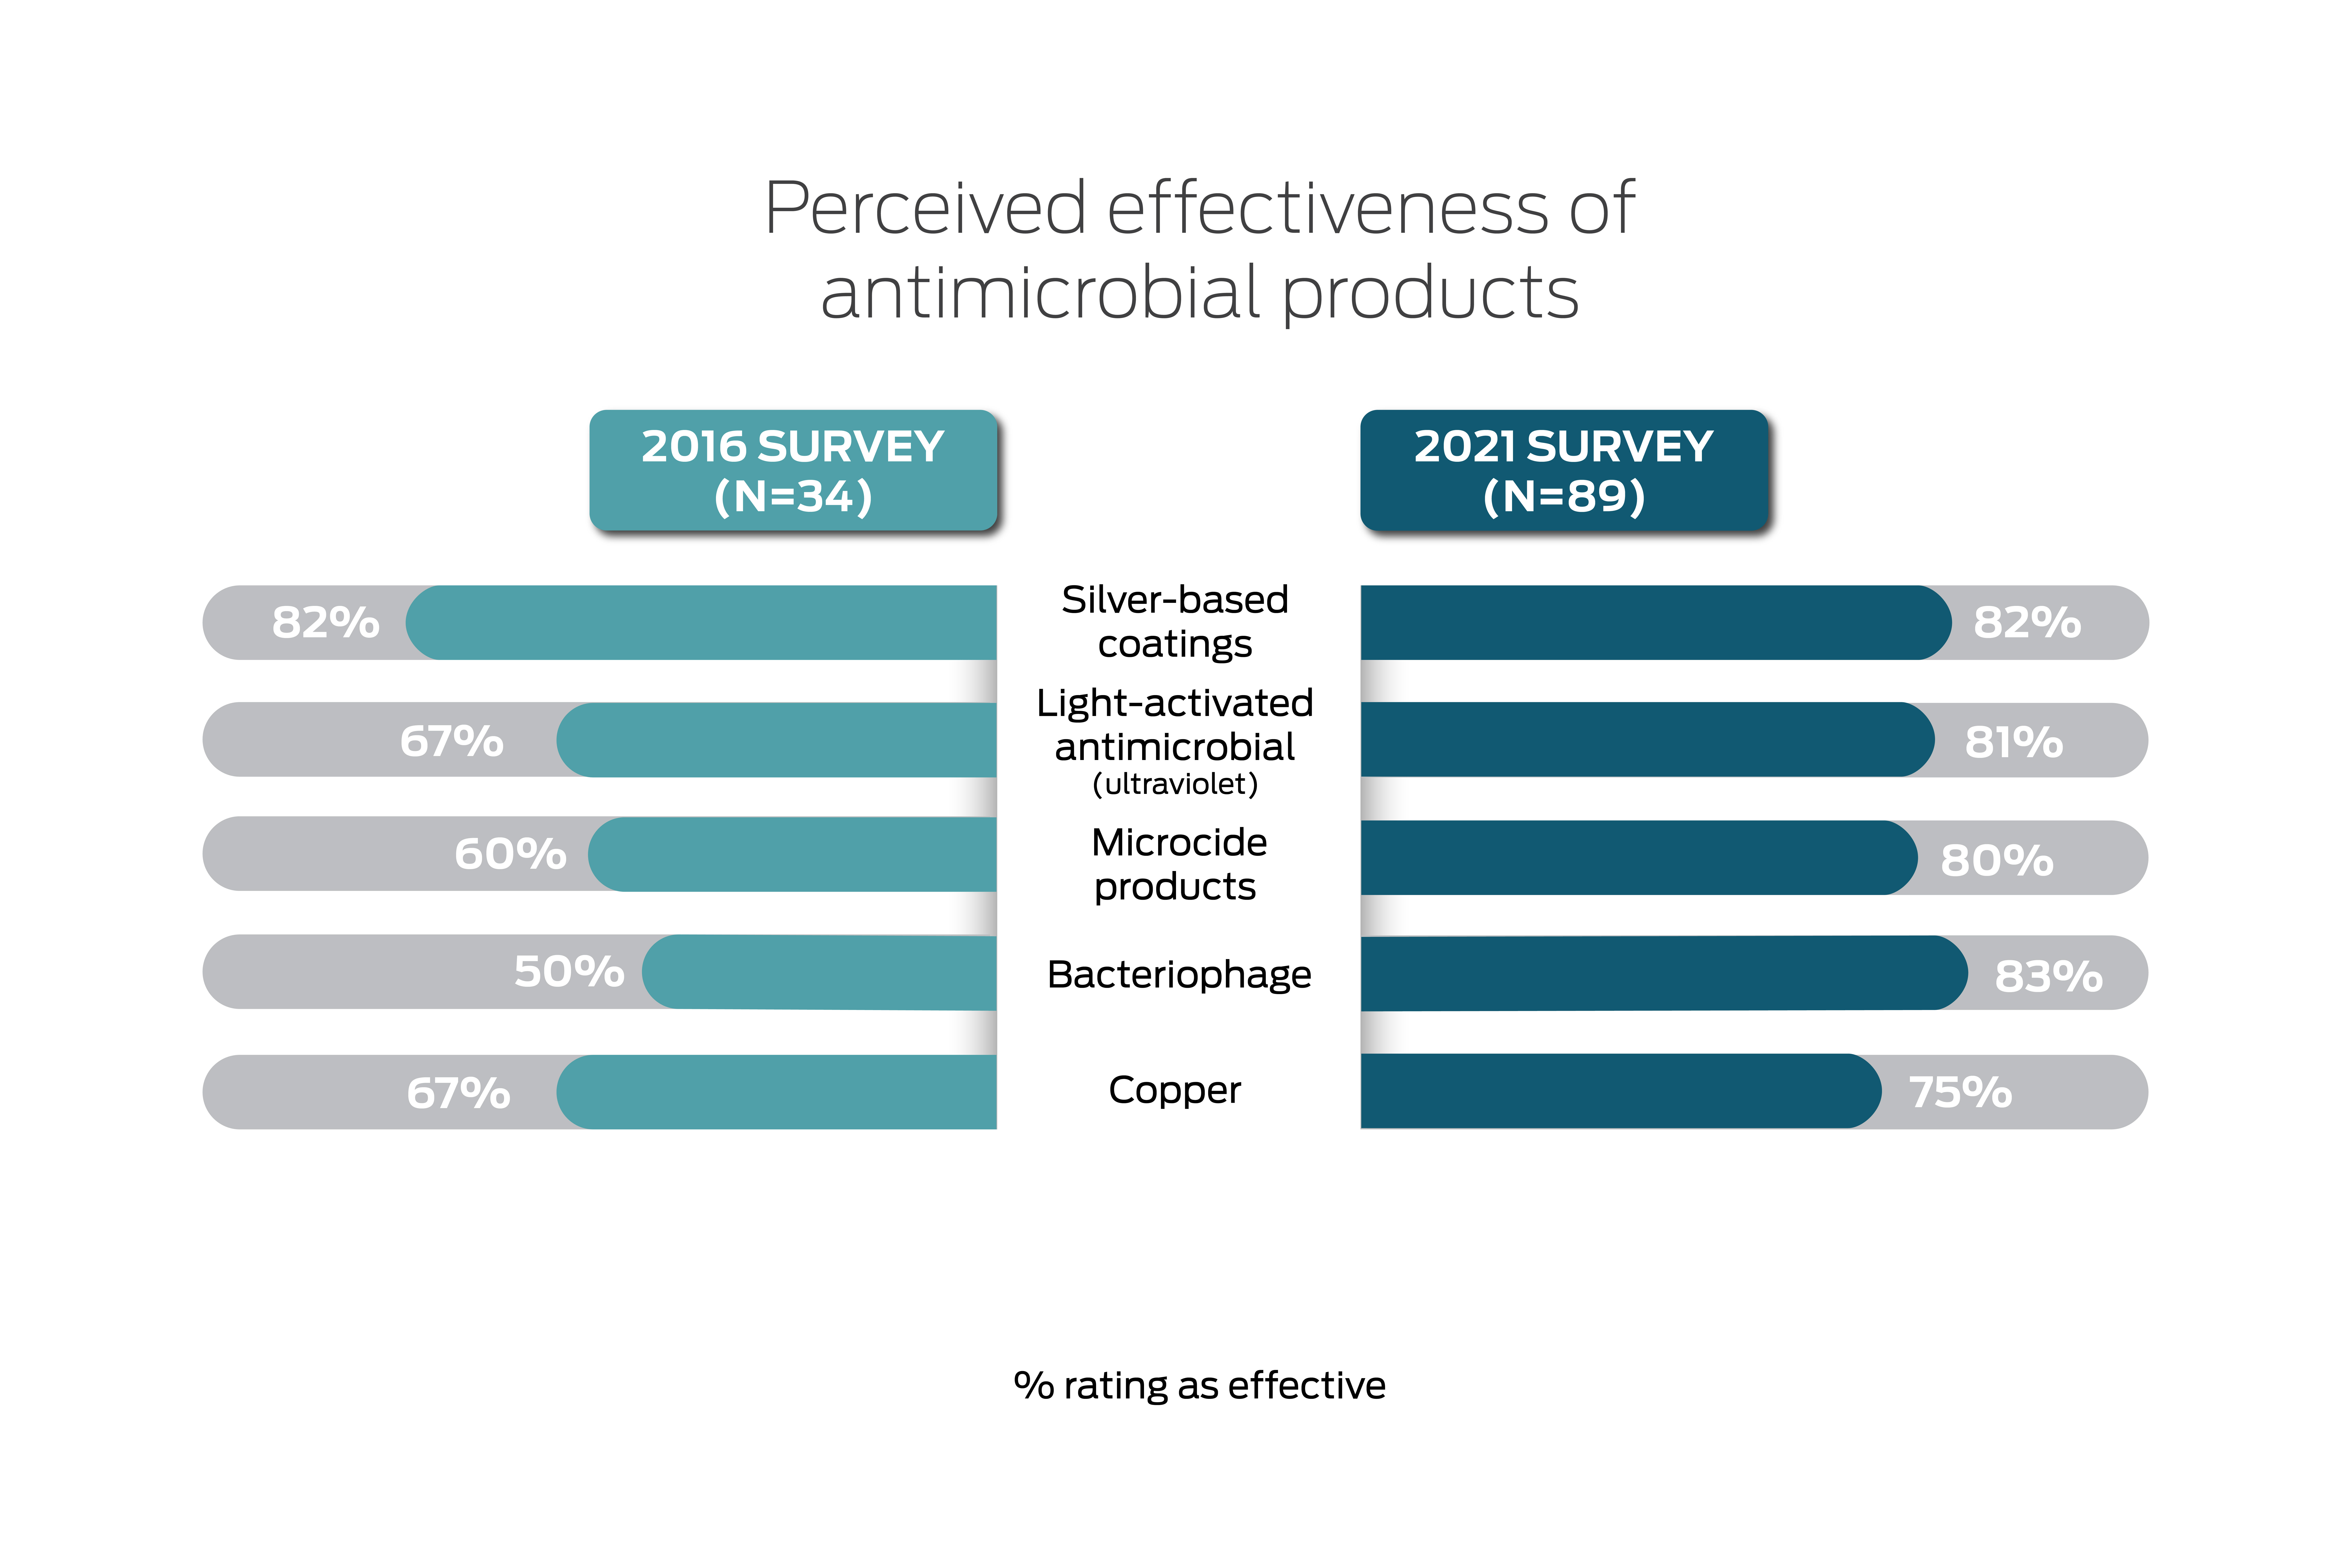 health care trends and changes - antimicrobial products